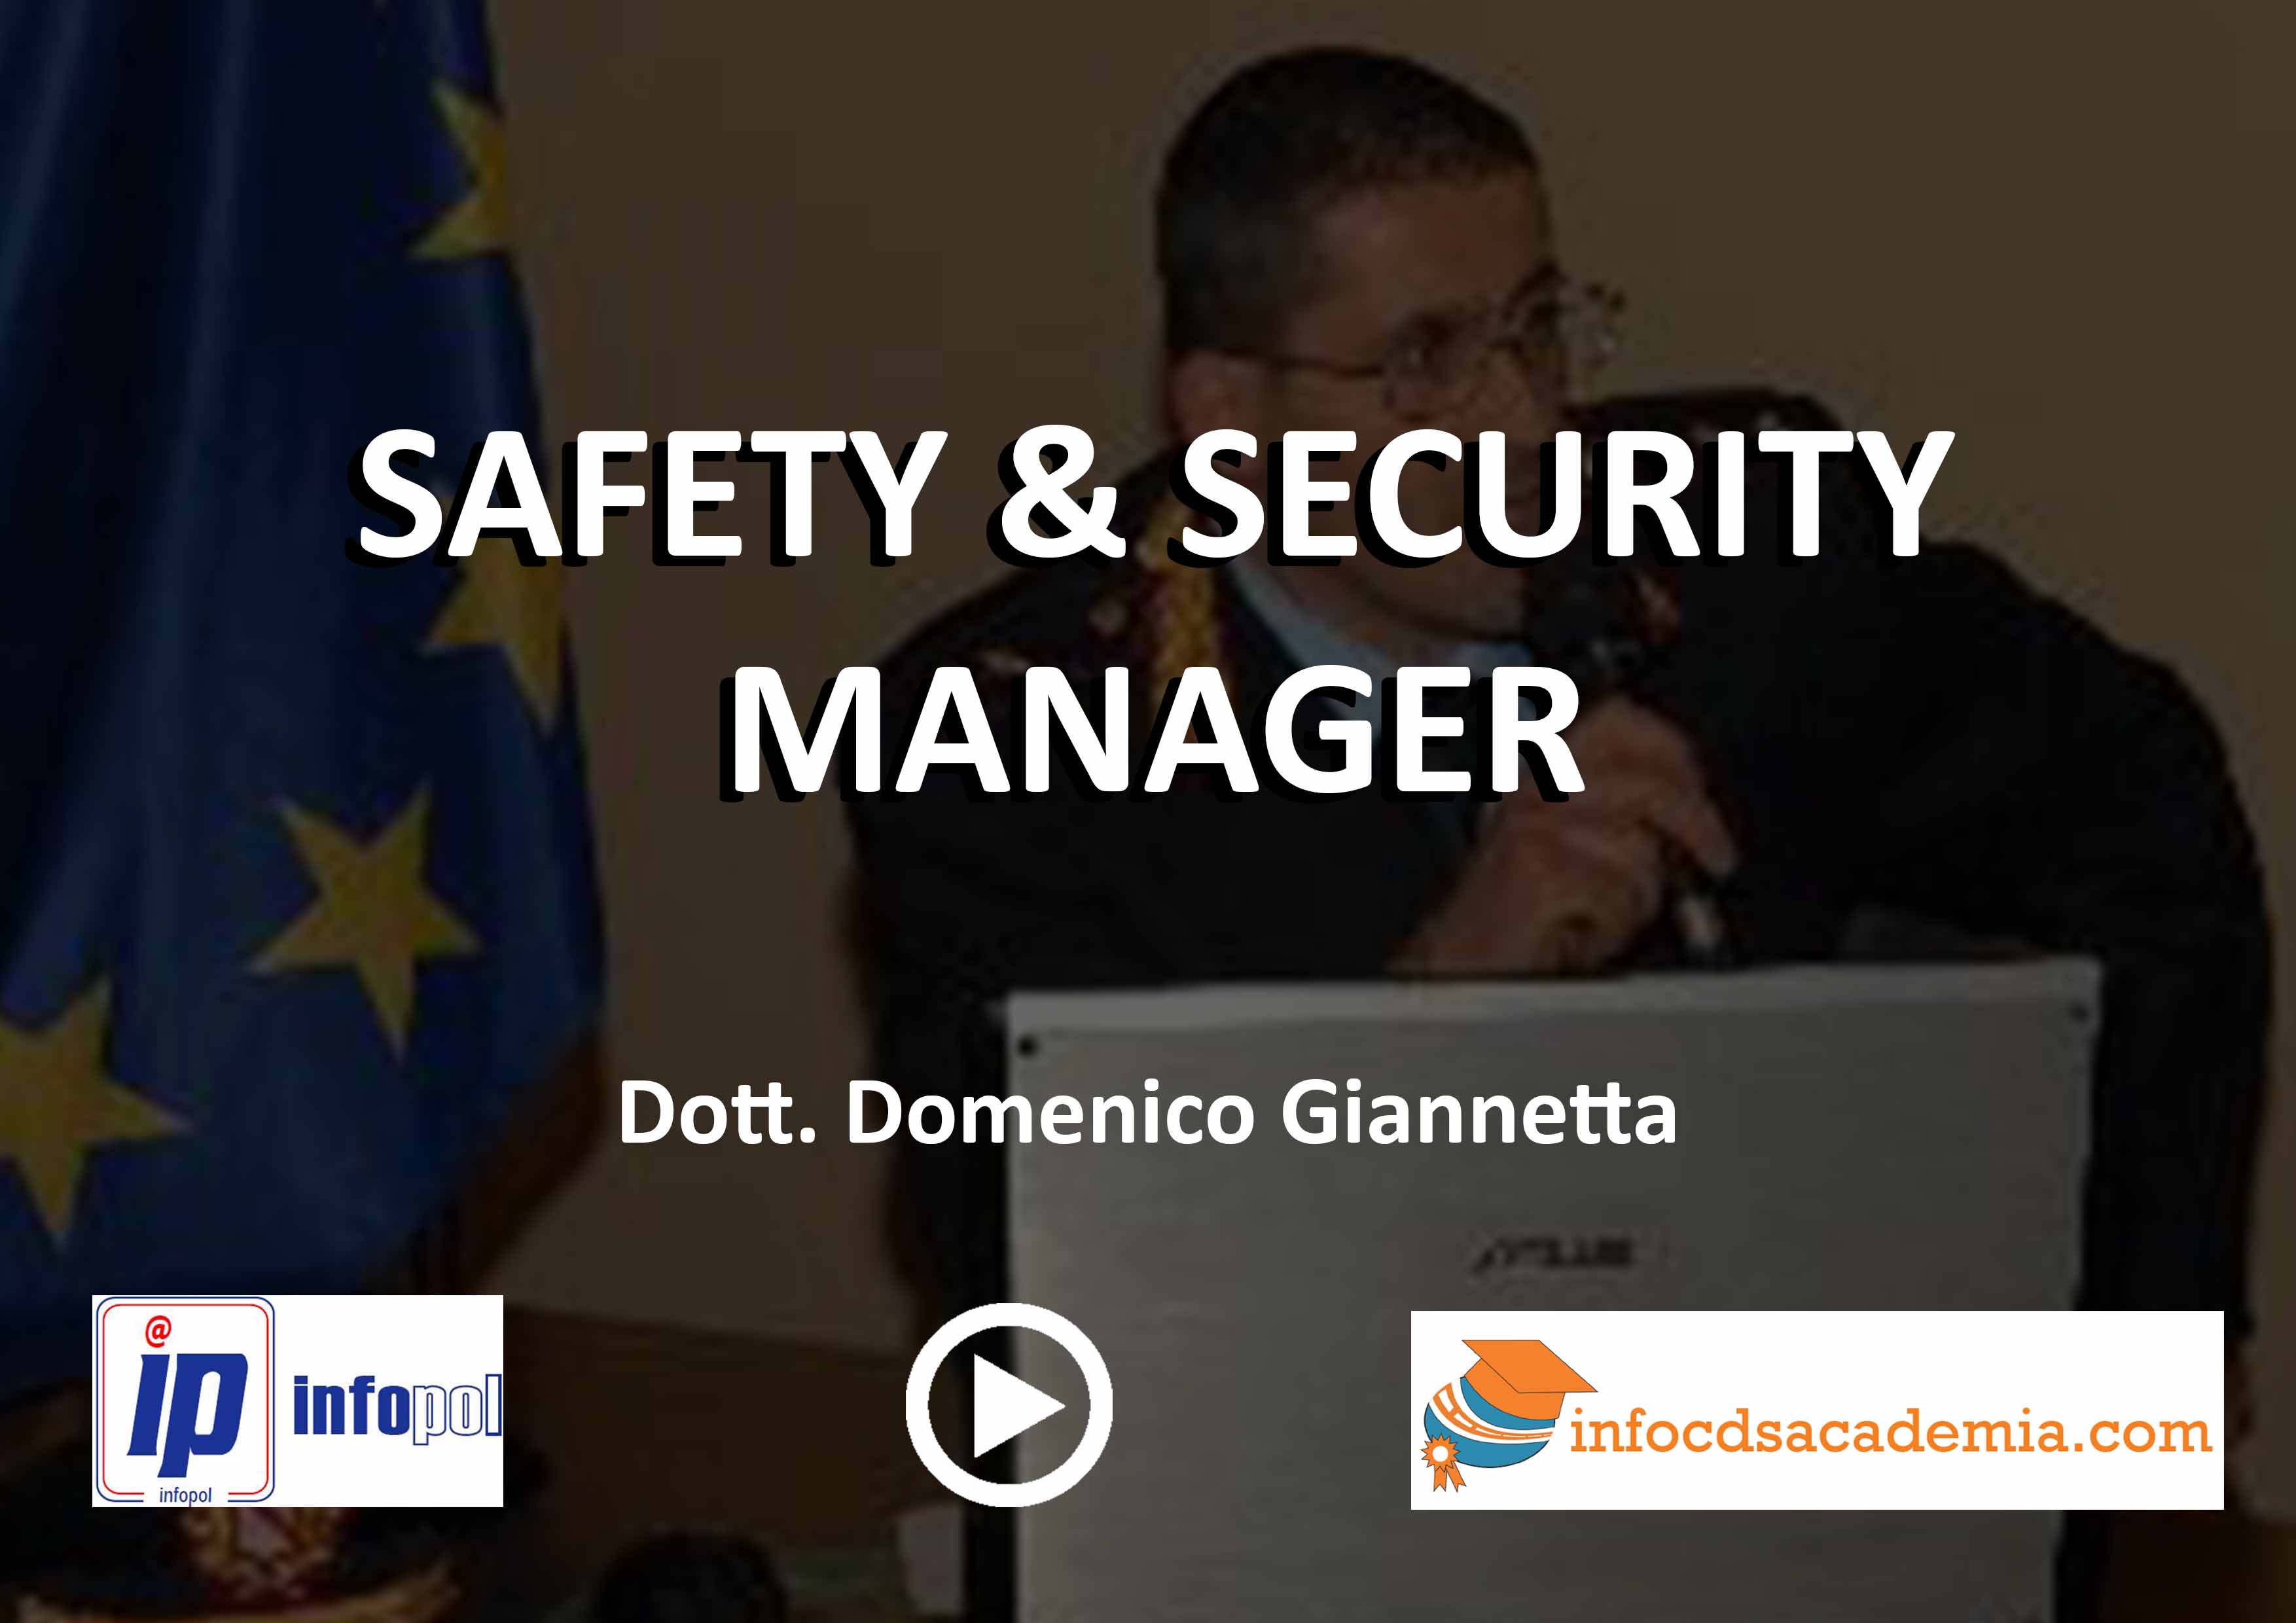 SAFETY & SECURITY MANAGER